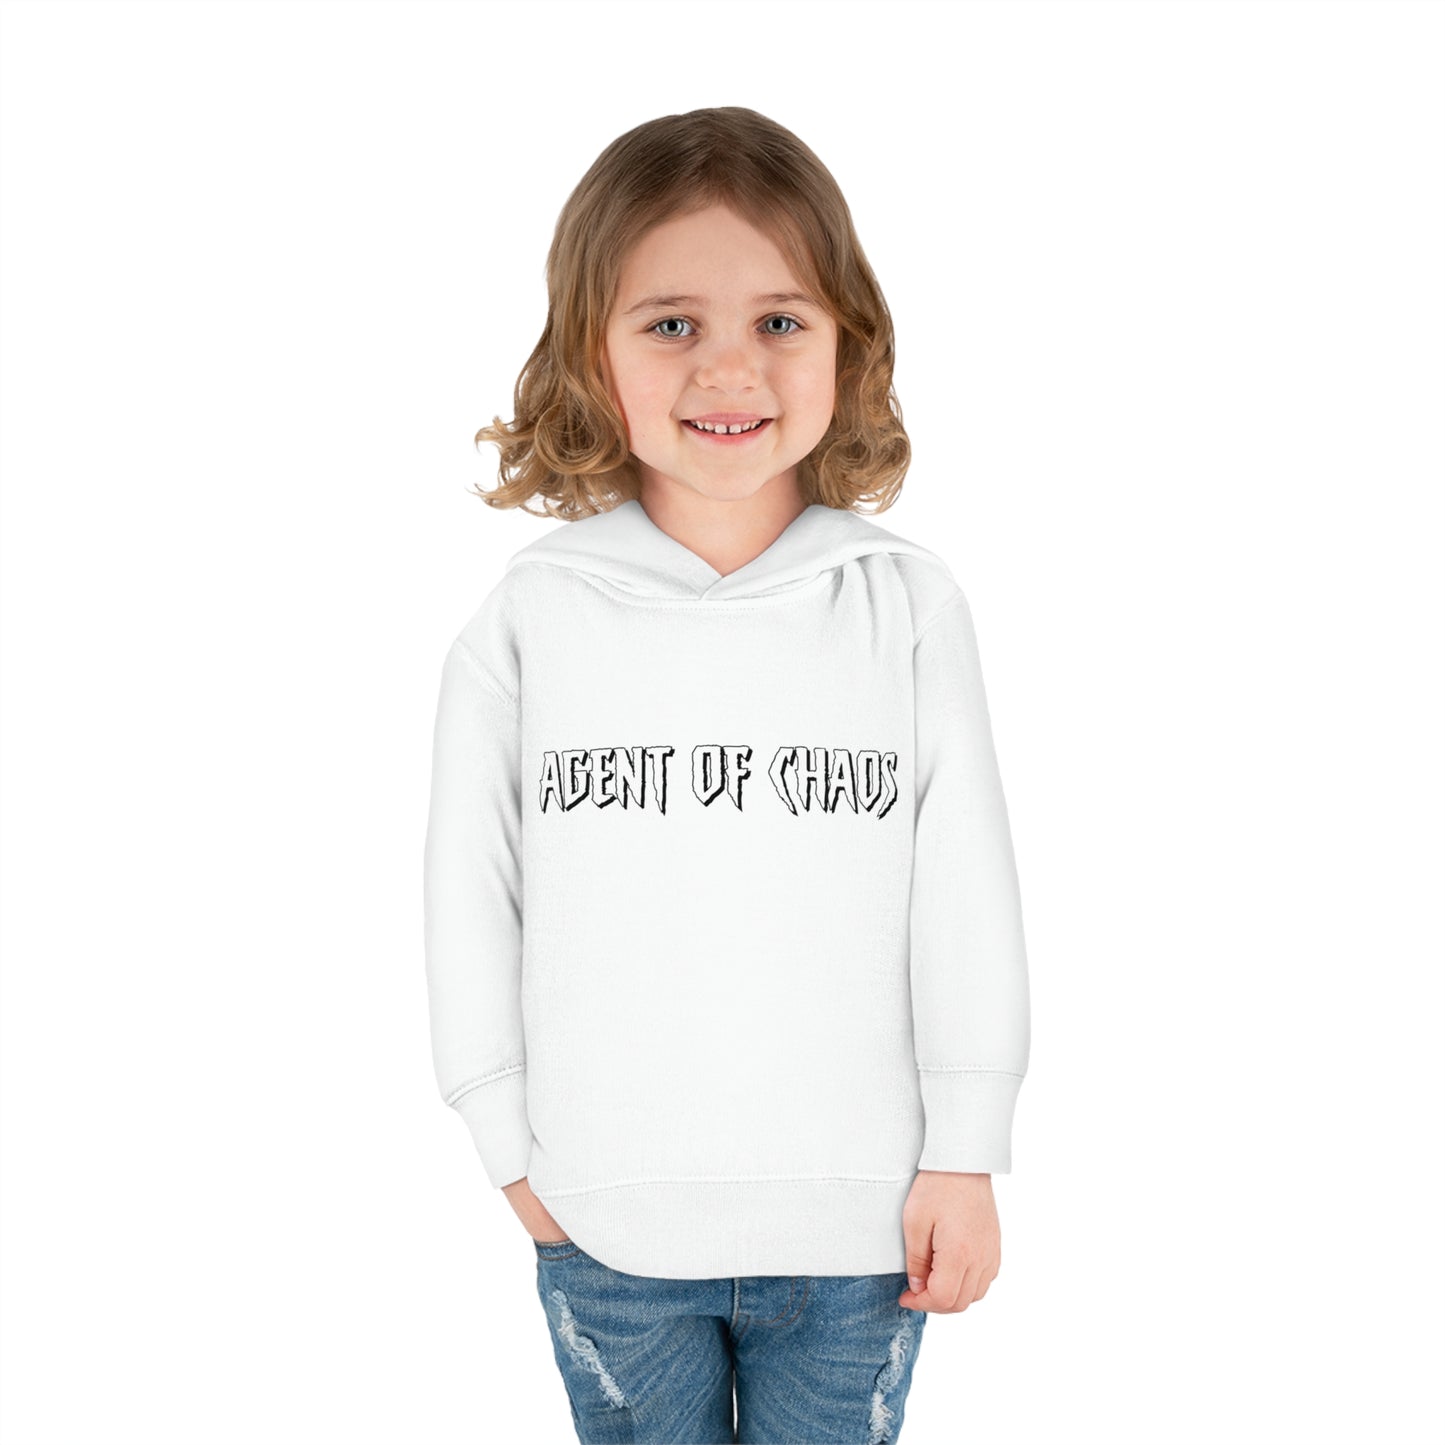 Agent of Chaos - blk - txt - Toddler Pullover Fleece Hoodie